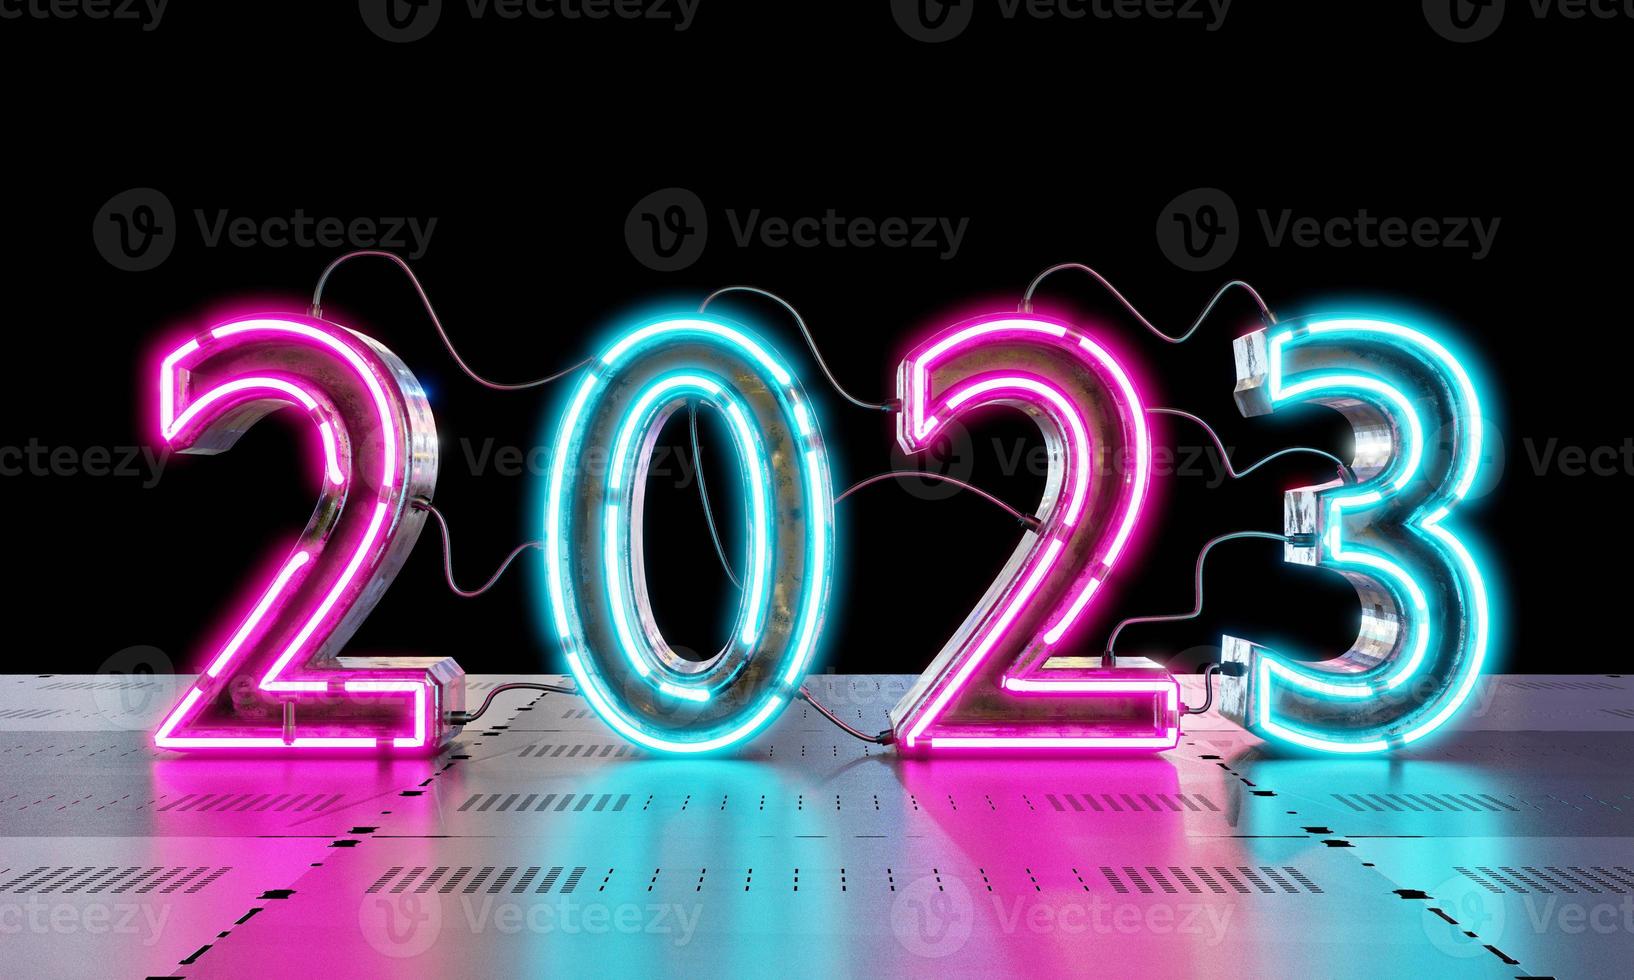 2023 neon lighting on metallic floor background. Technology and Abstract wallpaper concept. Happy new year theme. 3D illustration rendering